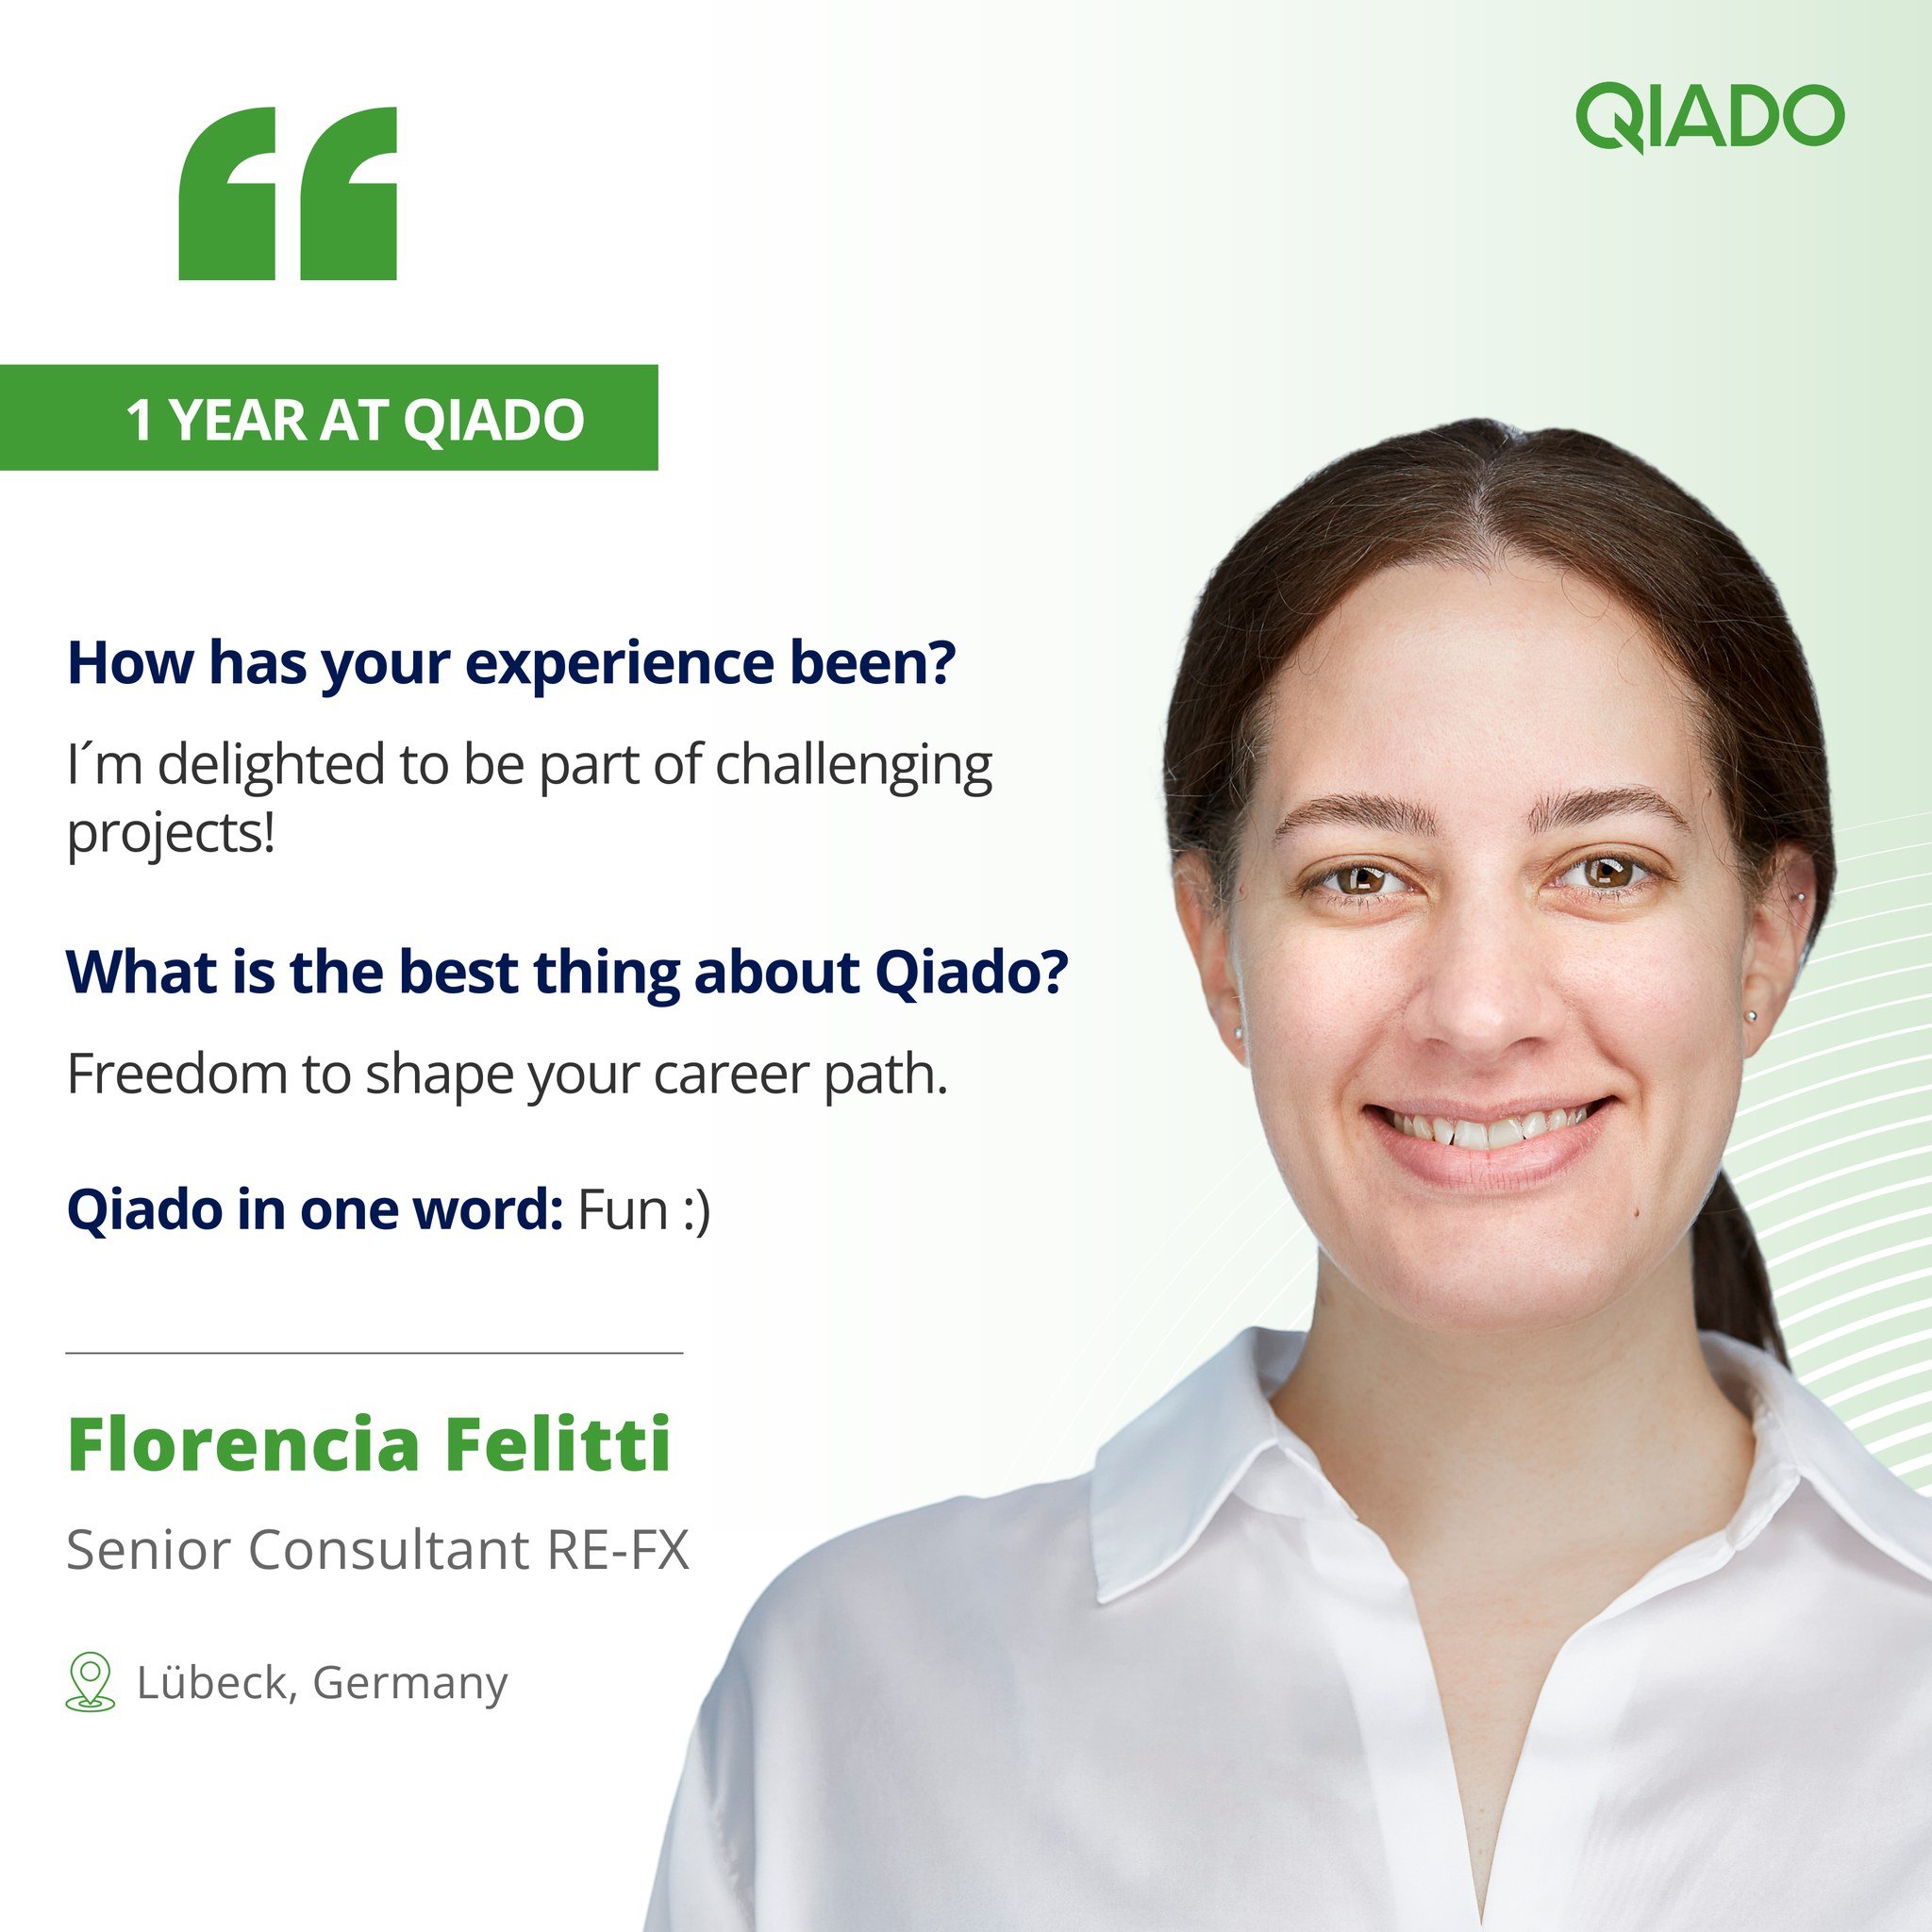 It&acute;s time to celebrate: Florencia Felitti just turned one year at Qiado 🎉 

From Argentina to Germany, she faced new SAP RE-FX challenges and is adding so much value to our team. It&acute;s amazing to have you on board!

Looking forward to cel